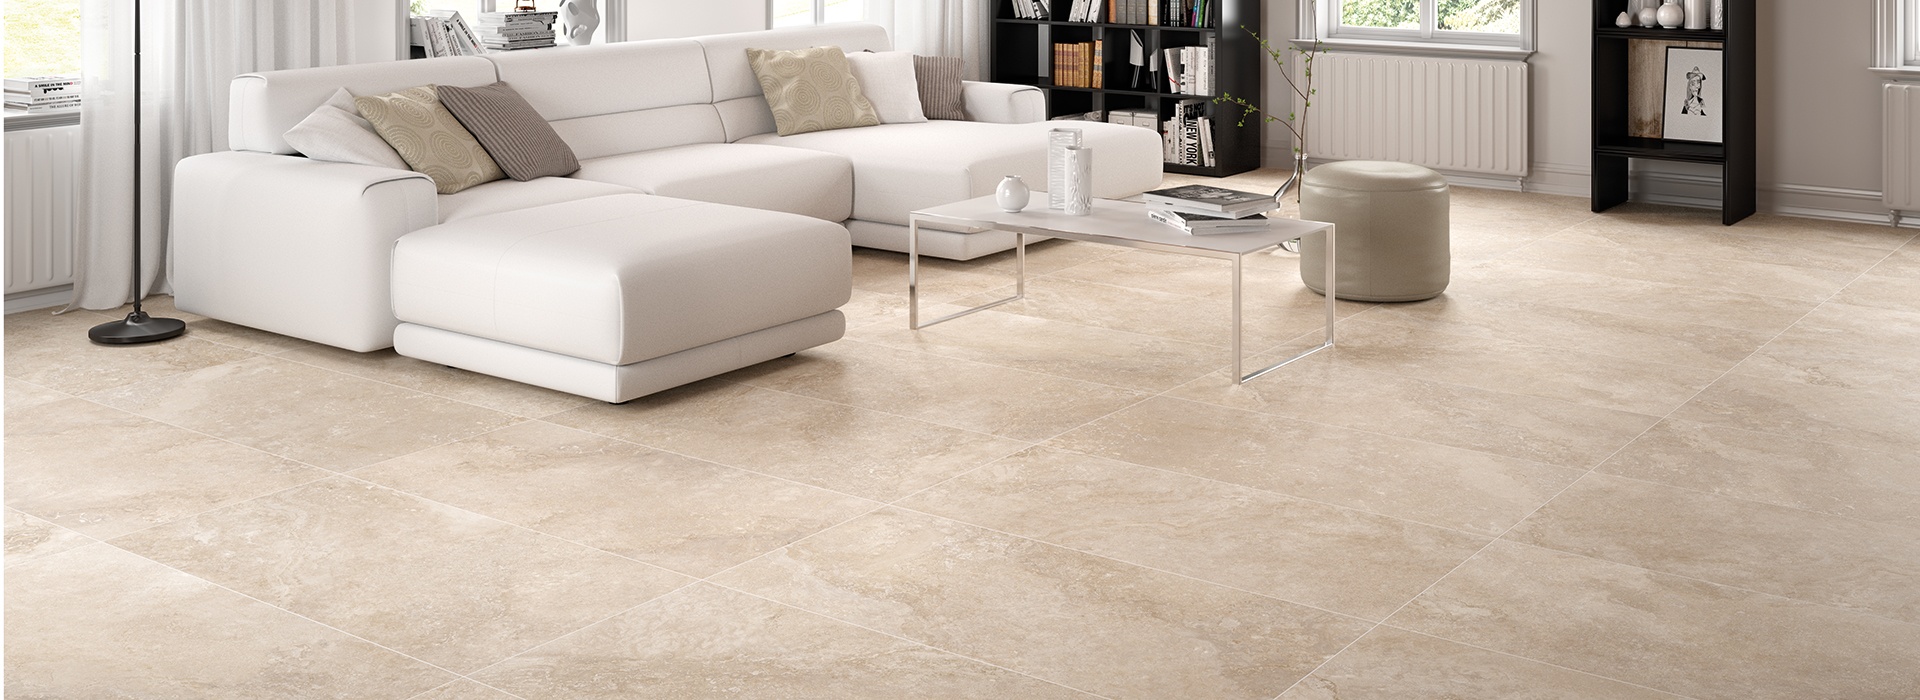 Italtile’s exclusive new Spanish Stone-look tiles by Stylnul pay homage to Dolomite rock.